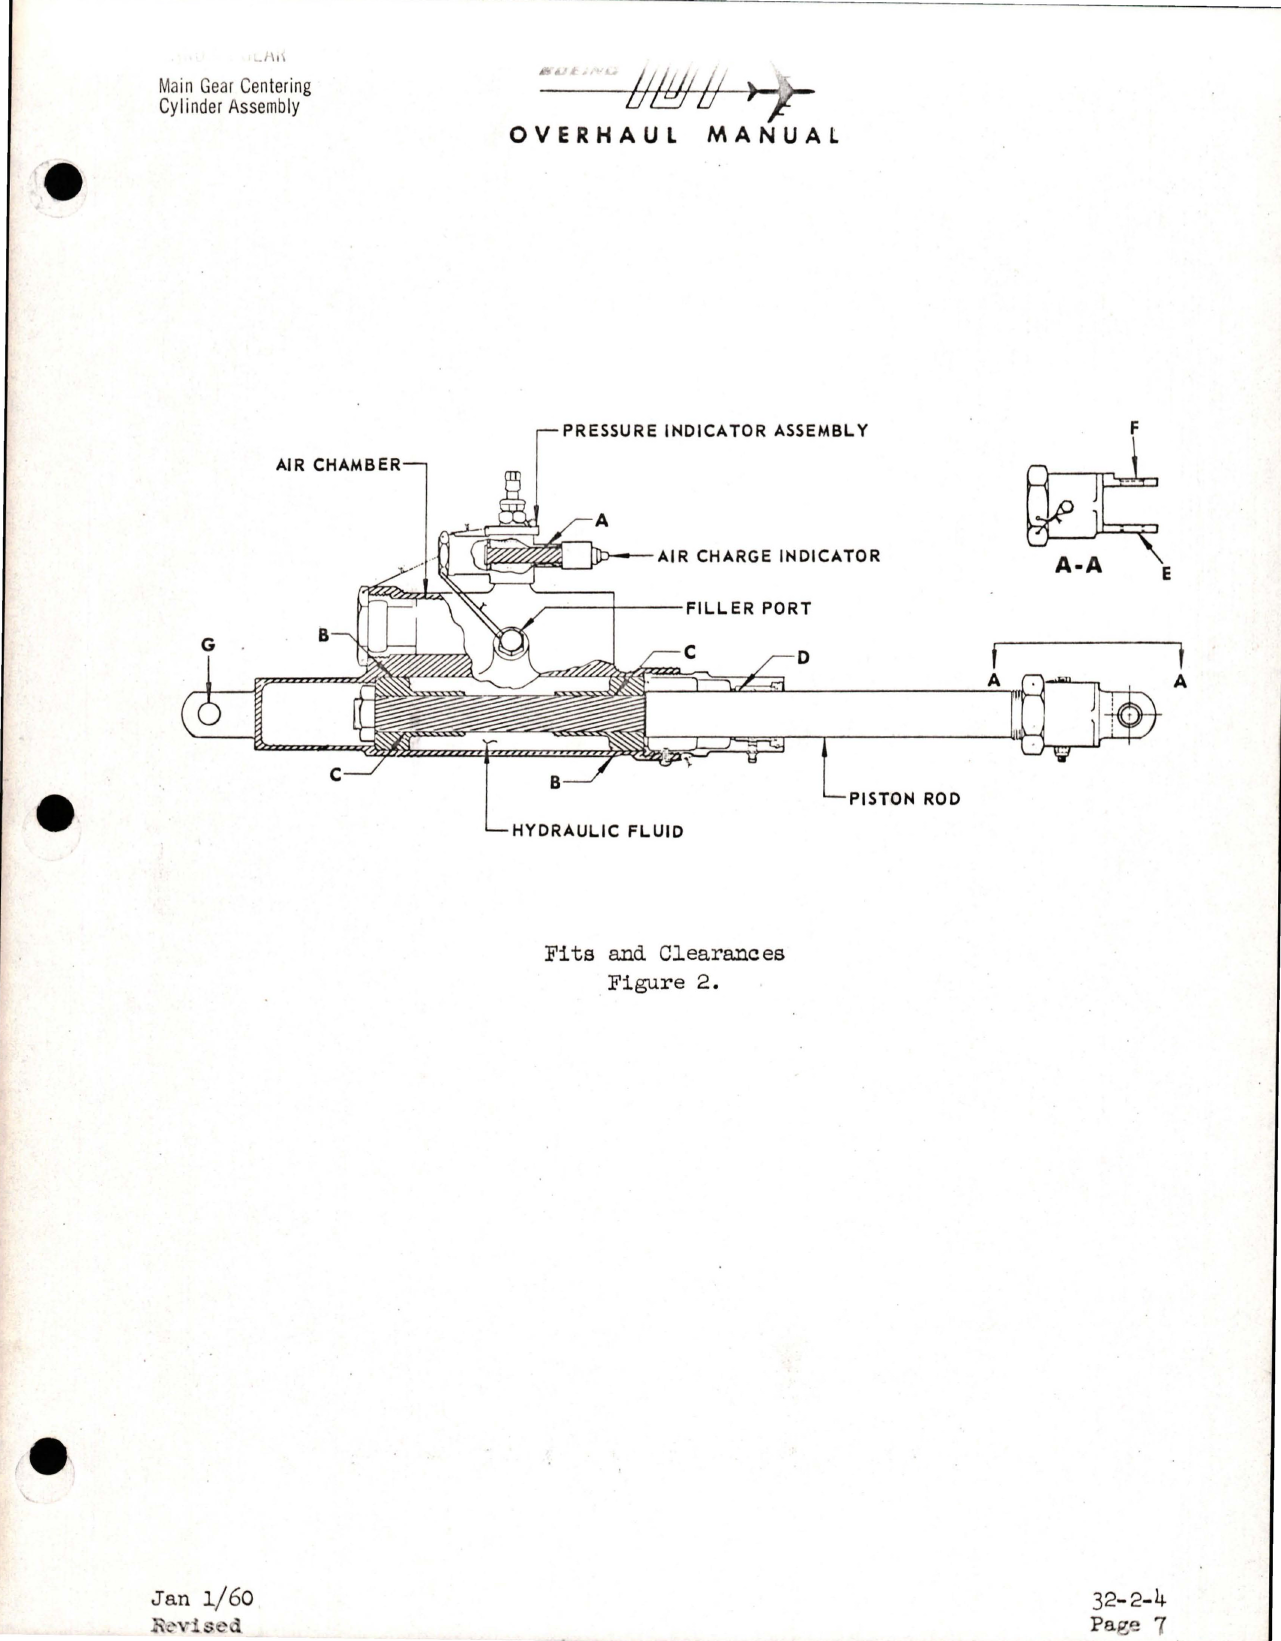 Sample page 7 from AirCorps Library document: Overhaul Manual for Main Gear Centering Cylinder Assembly